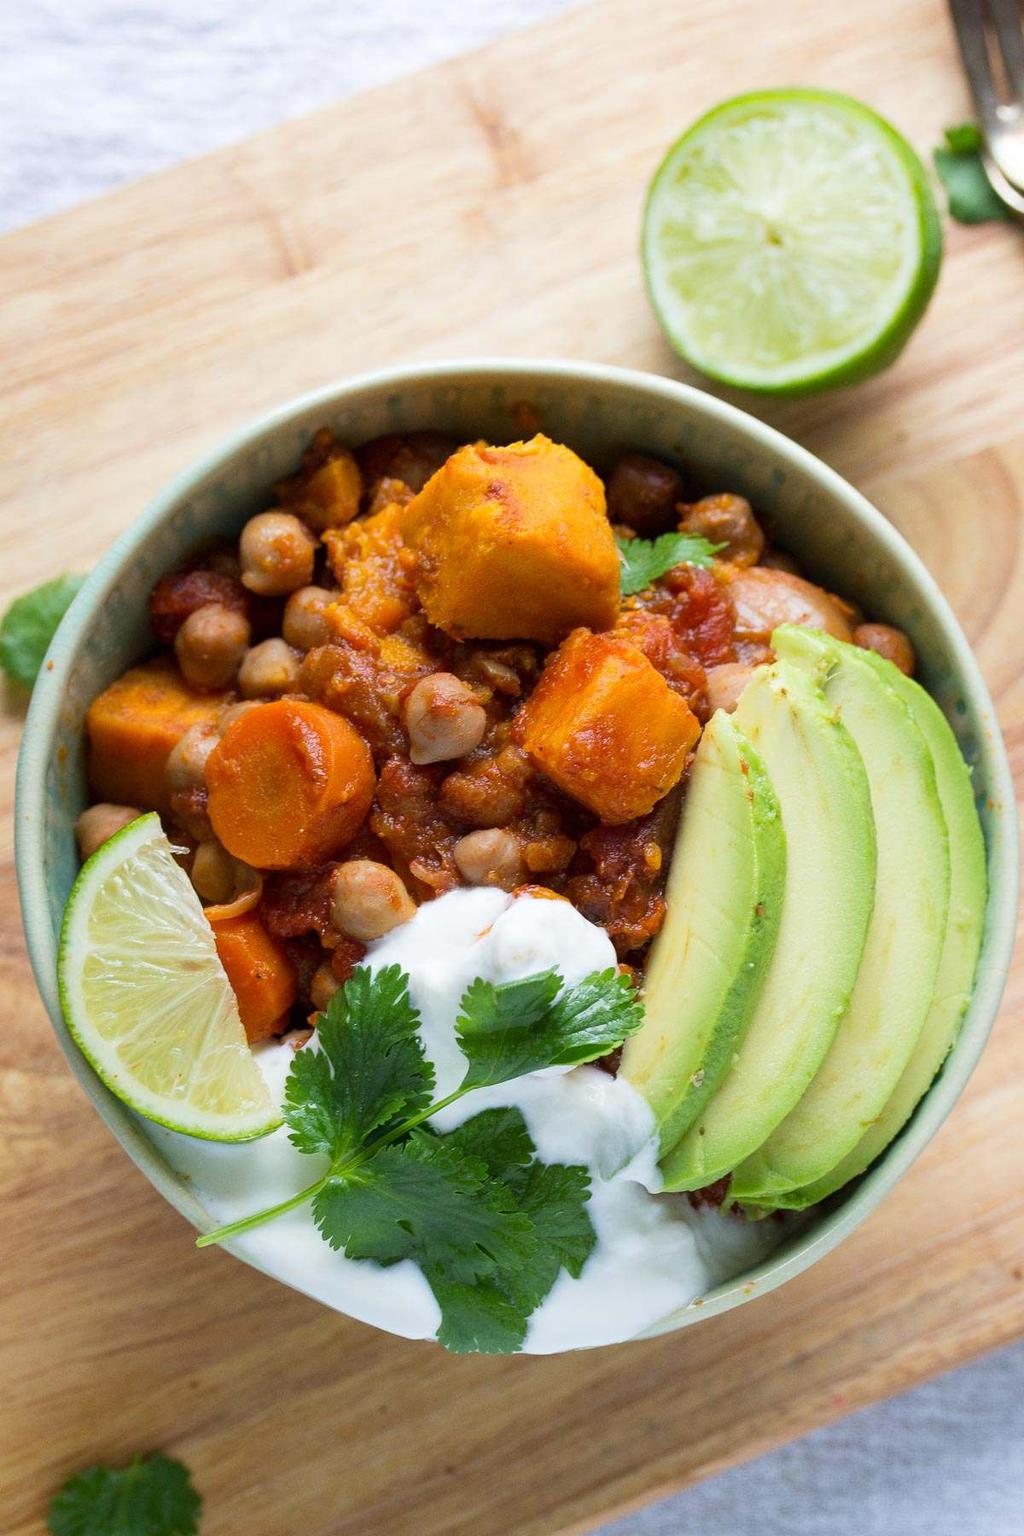 2: Slow Cooker Smoky Sweet Potato & Chickpea Chili 28 oz can of diced tomatoes 13.